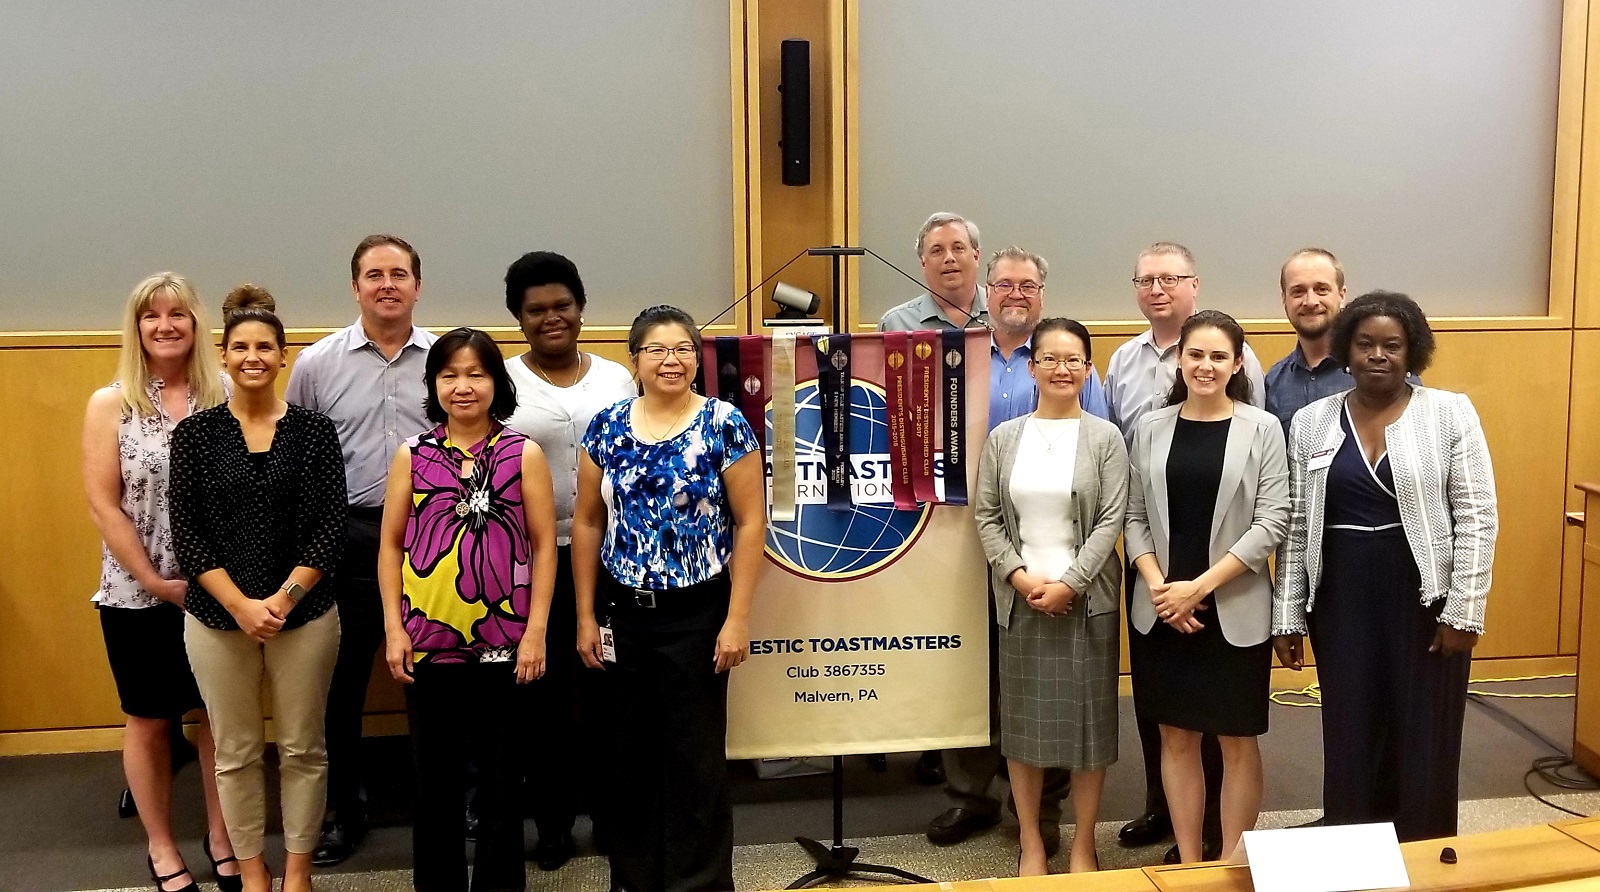 The diverse members of the Majestic Toastmasters club in Malvern, Pennsylvania, pose proudly with their club banner.